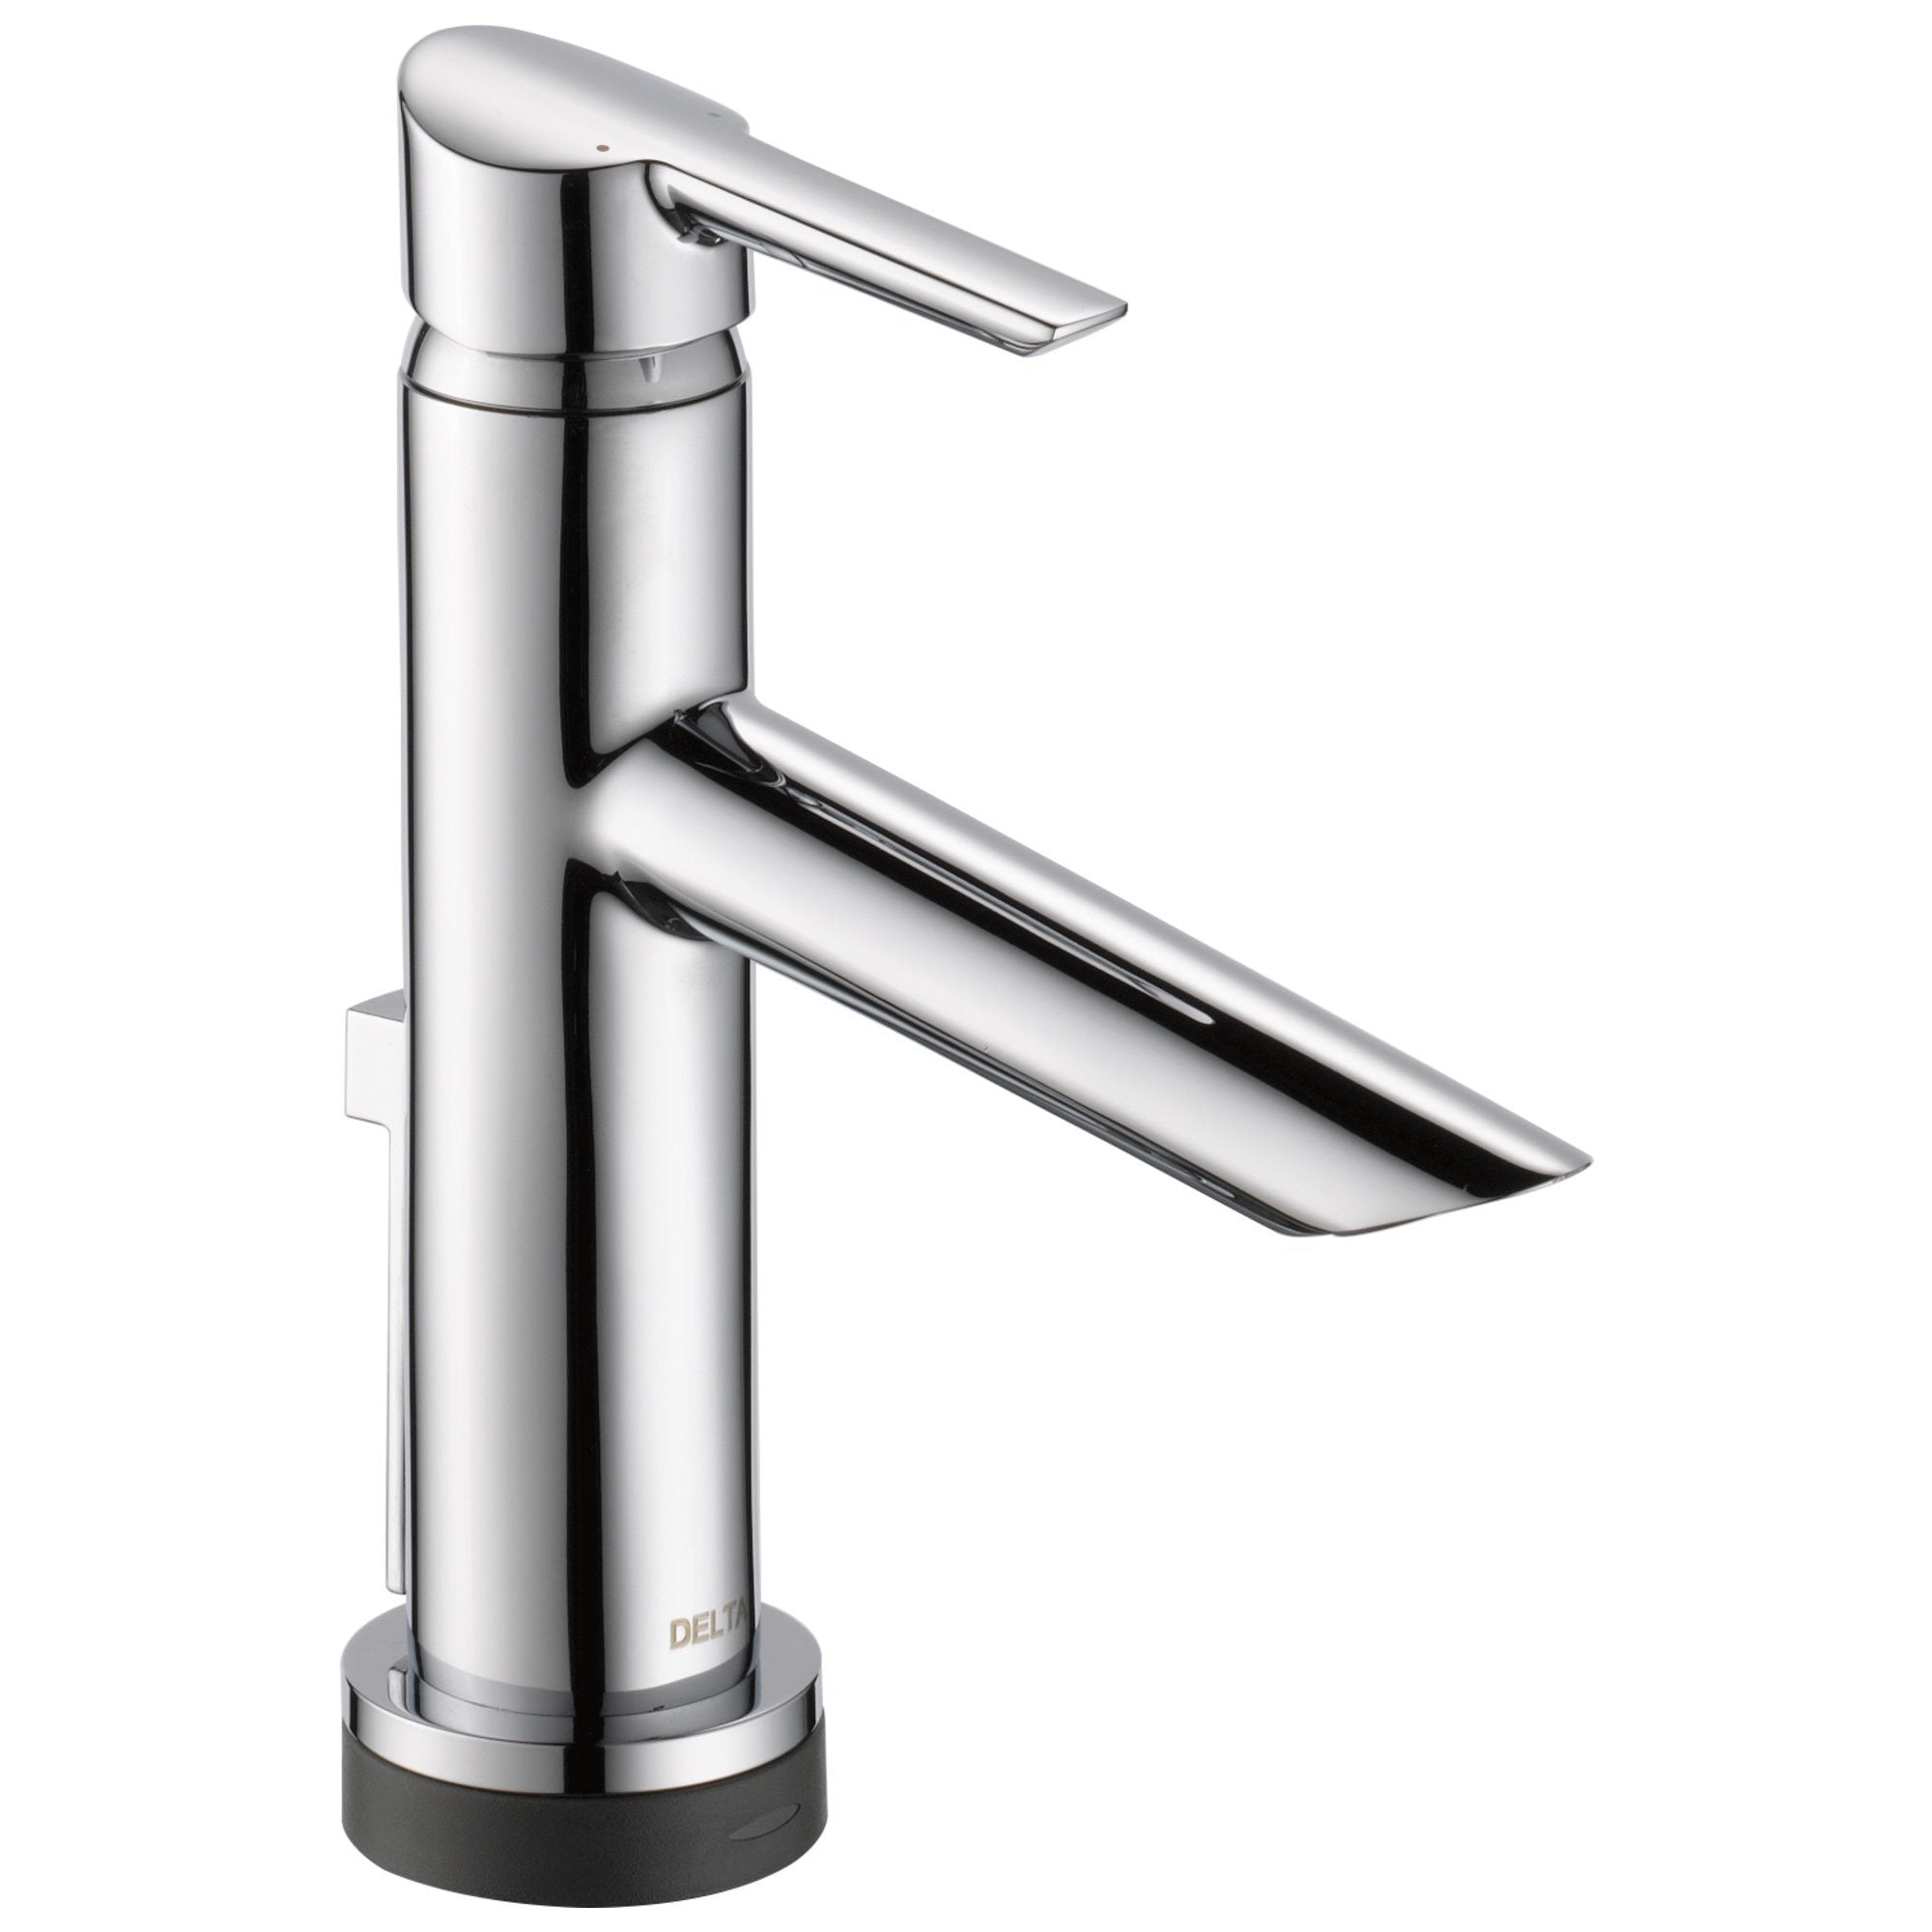 Delta Compel Collection Chrome Finish Modern Single Handle Electronic Bathroom Lavy Sink Faucet with Touch2Oxt Technology 731022